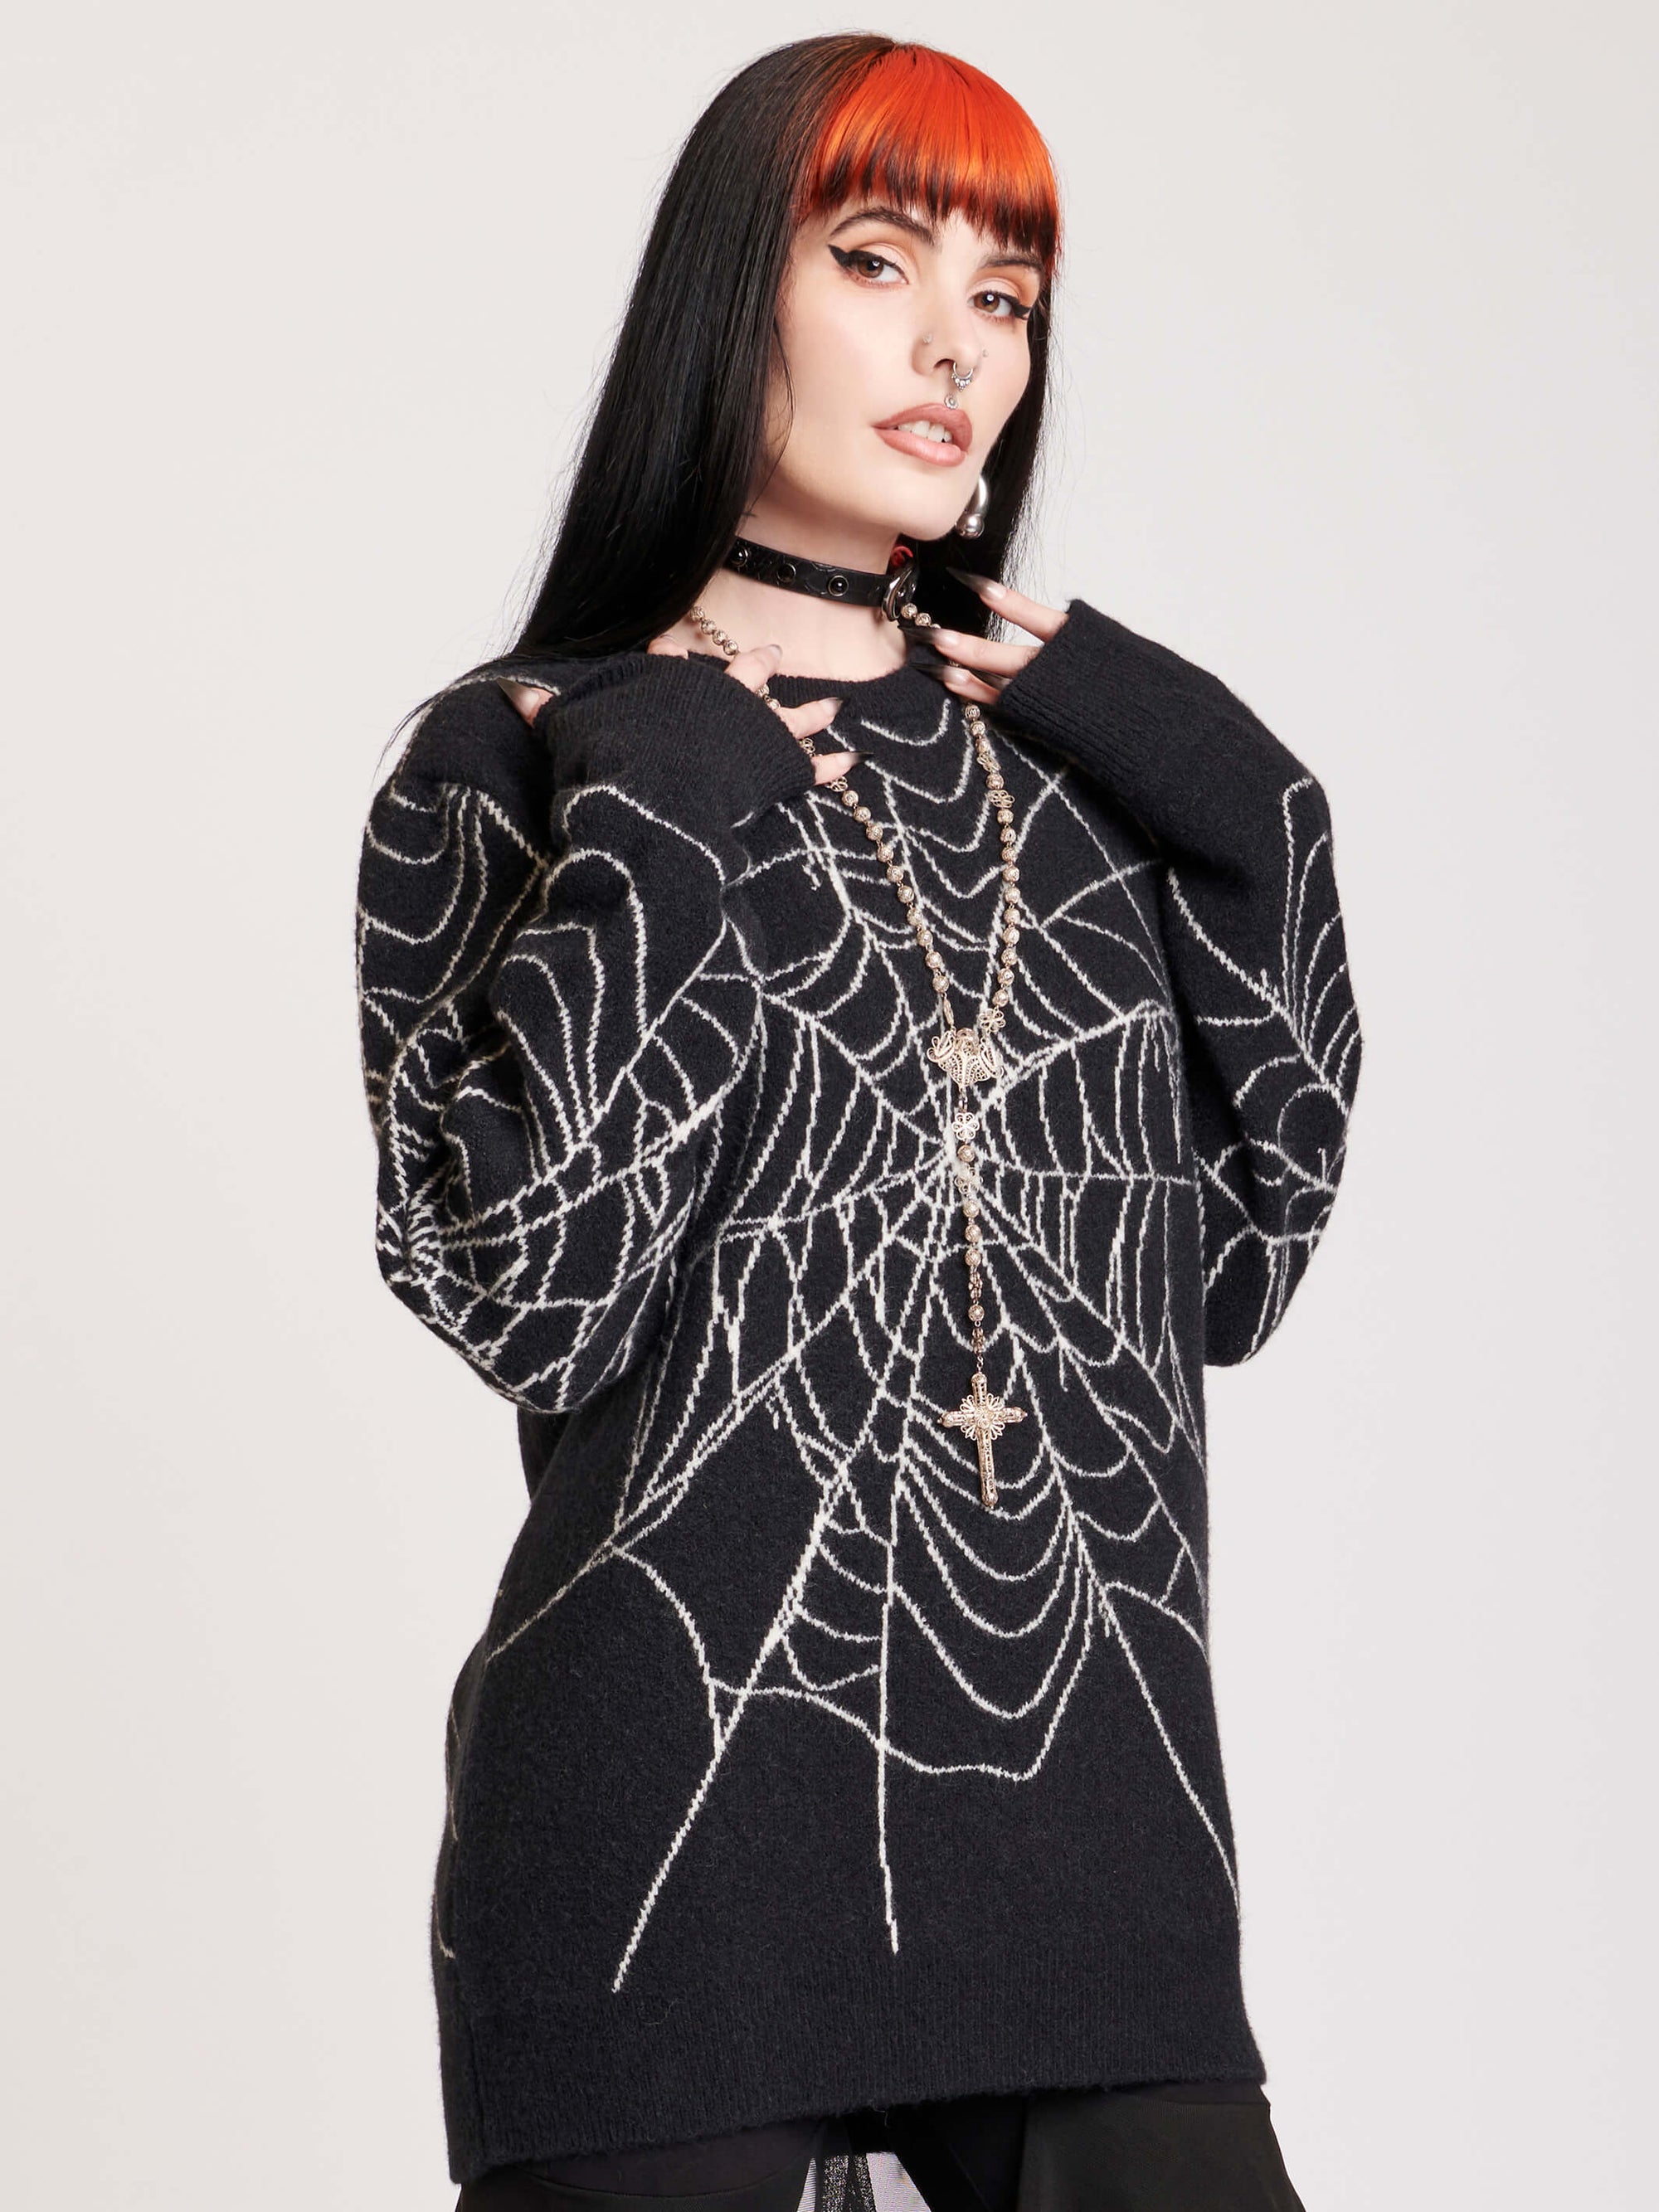 sweater with spiderweb motif on body and sleeves